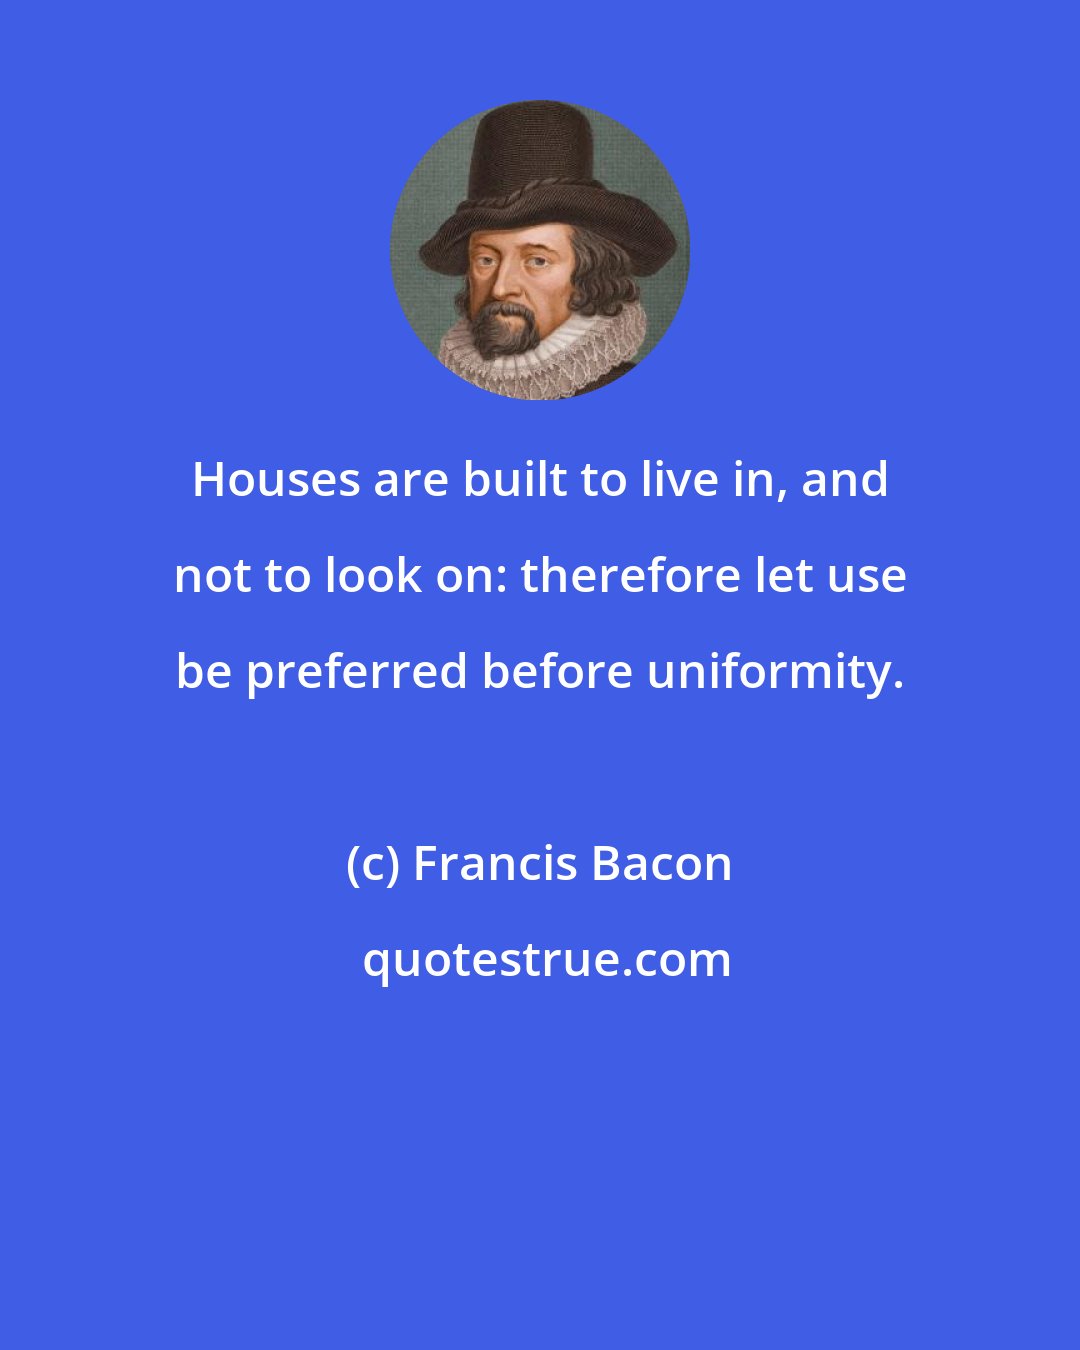 Francis Bacon: Houses are built to live in, and not to look on: therefore let use be preferred before uniformity.